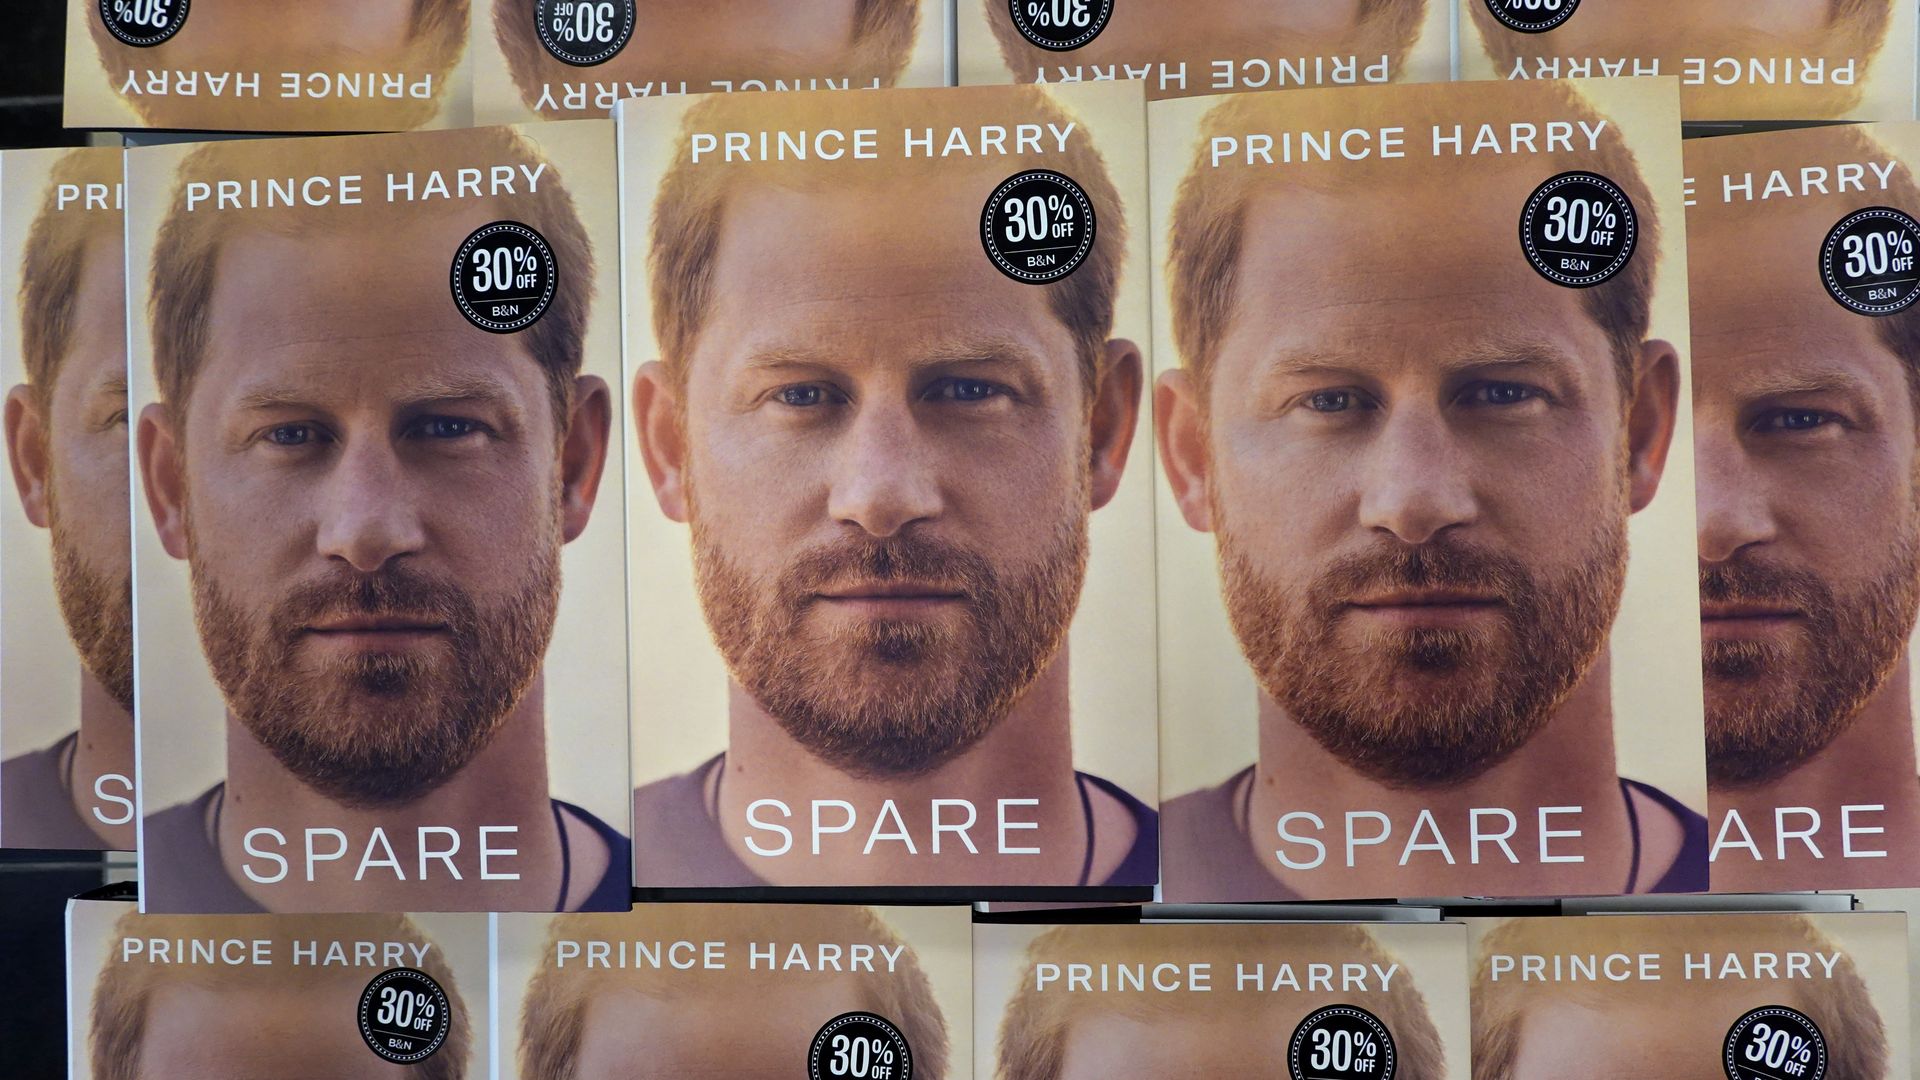 Multiple copies of Prince Harry's new book "Spare" lined up on a table.